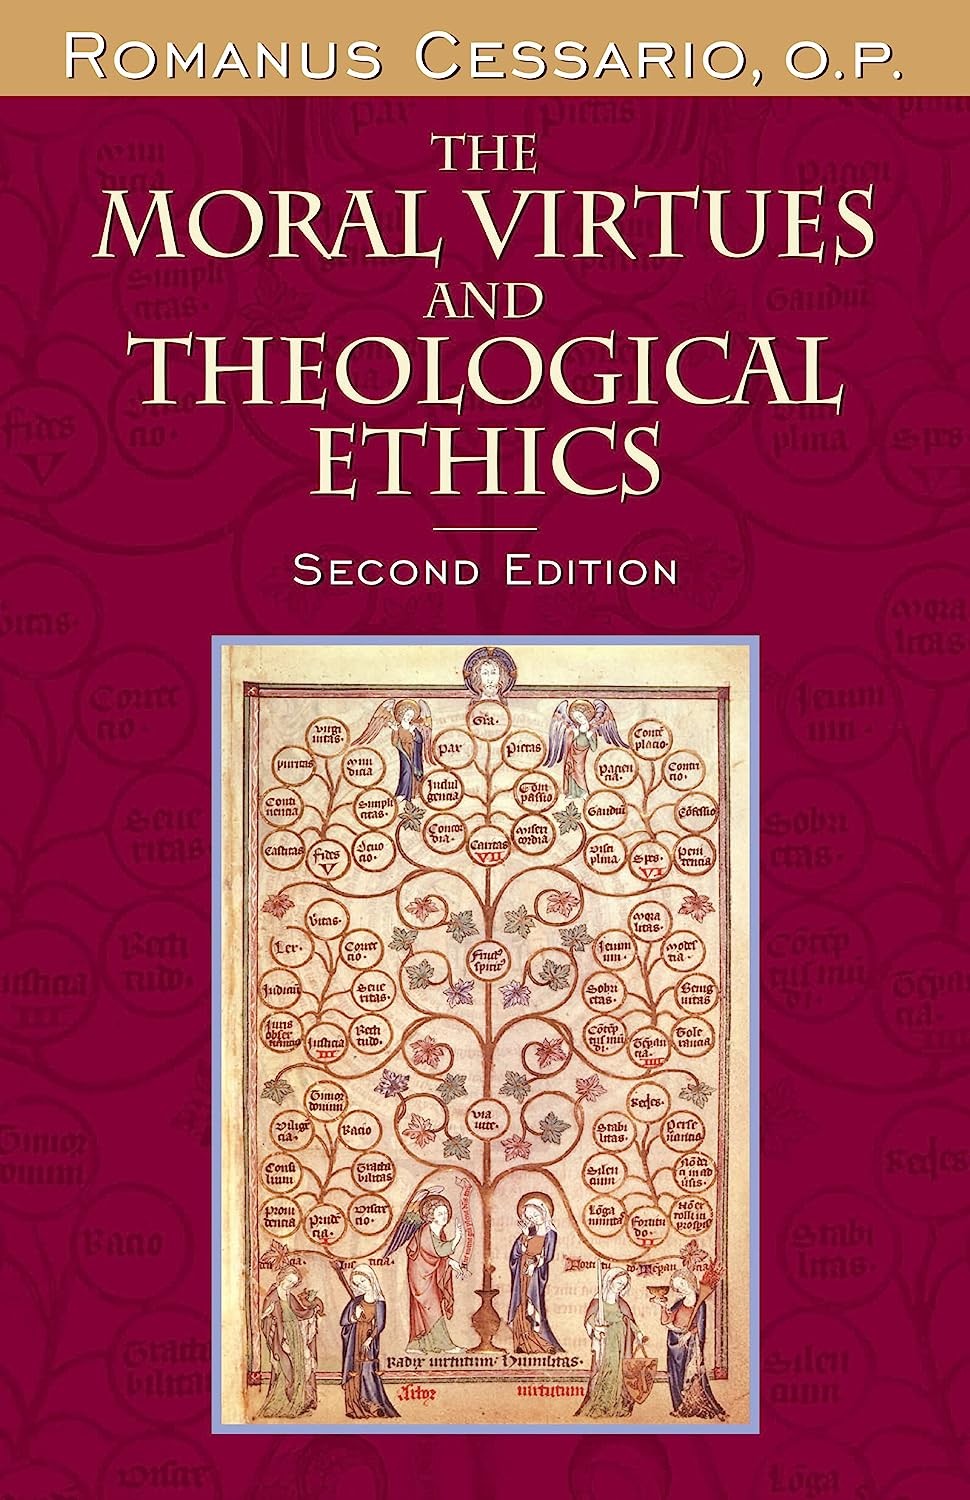 The Moral Virtues and Theological Ethics